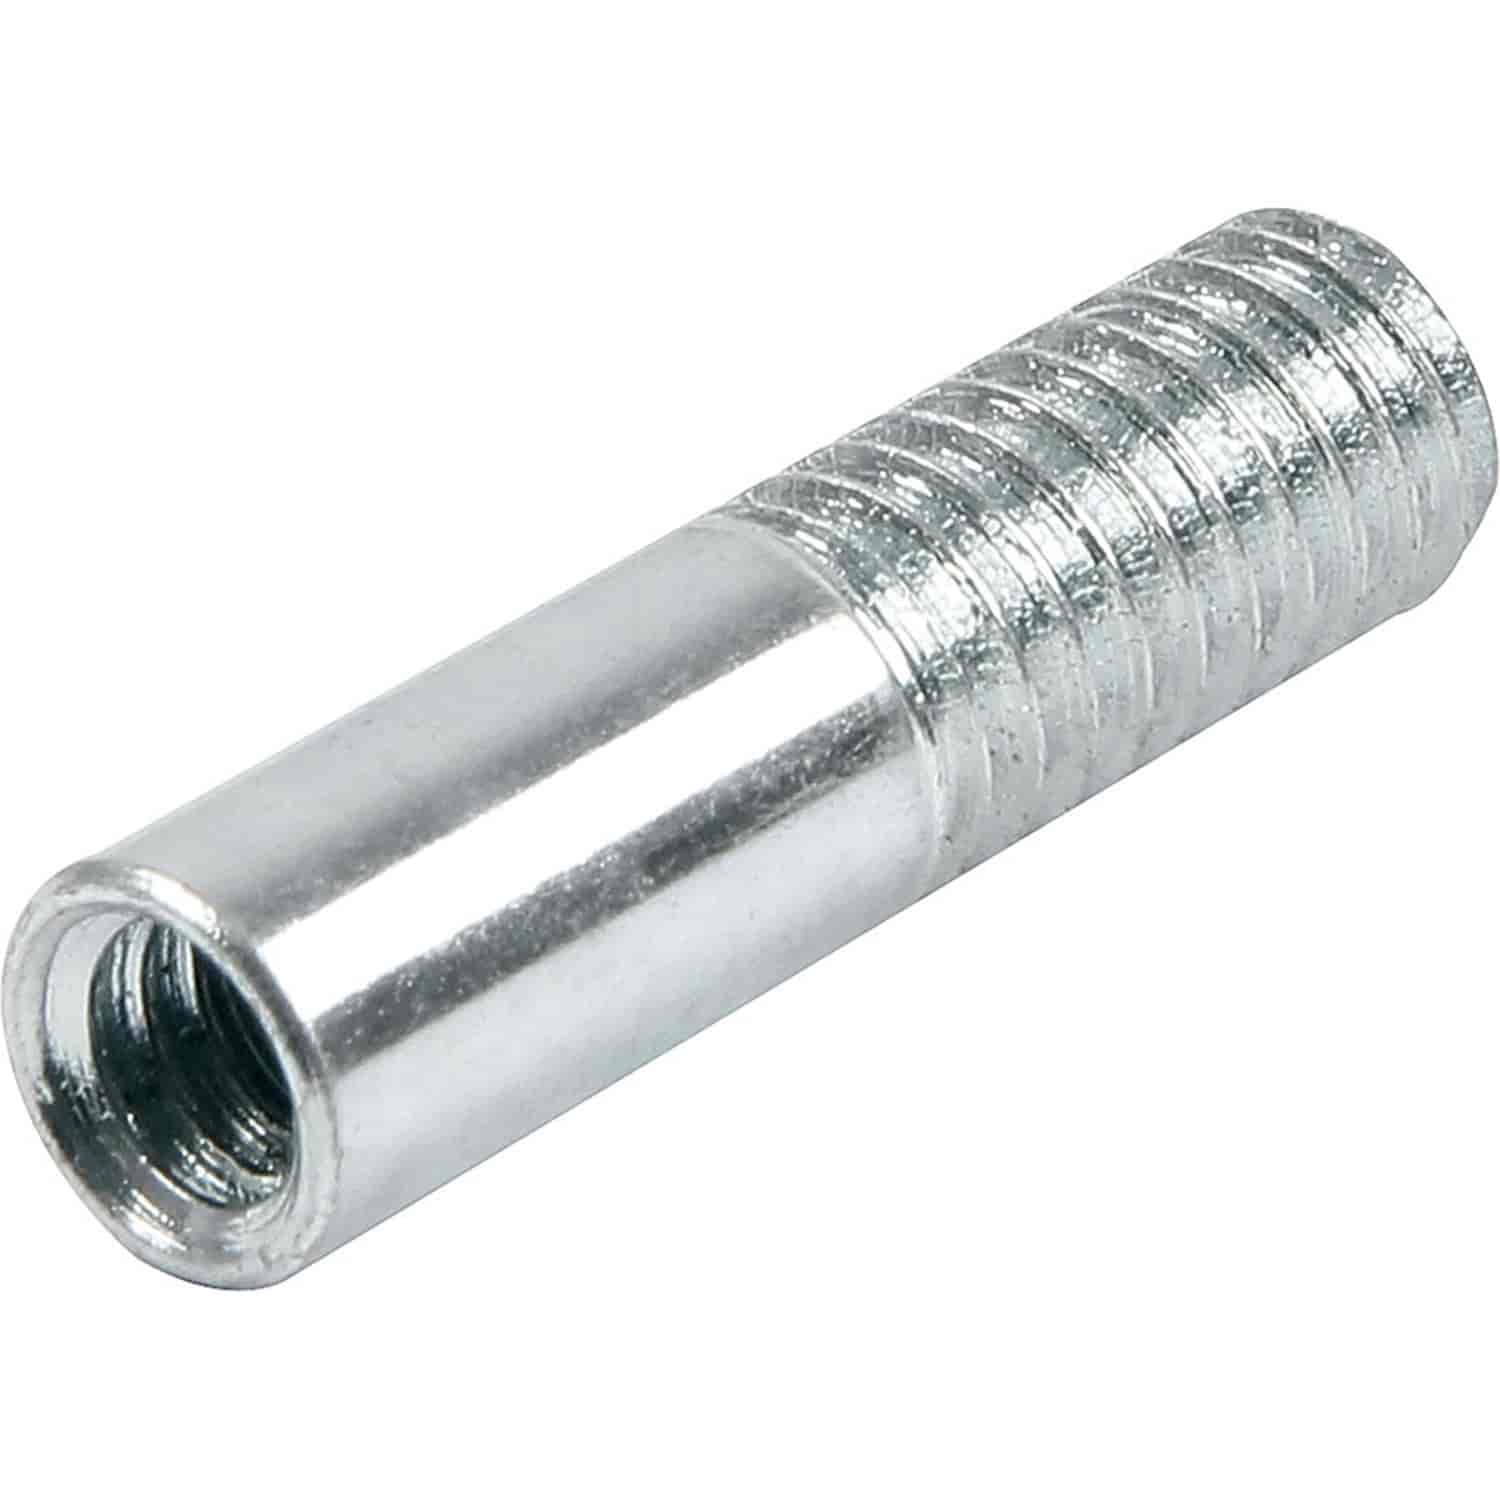 Air Cleaner Stud Adapter 1/4" to 5/16"